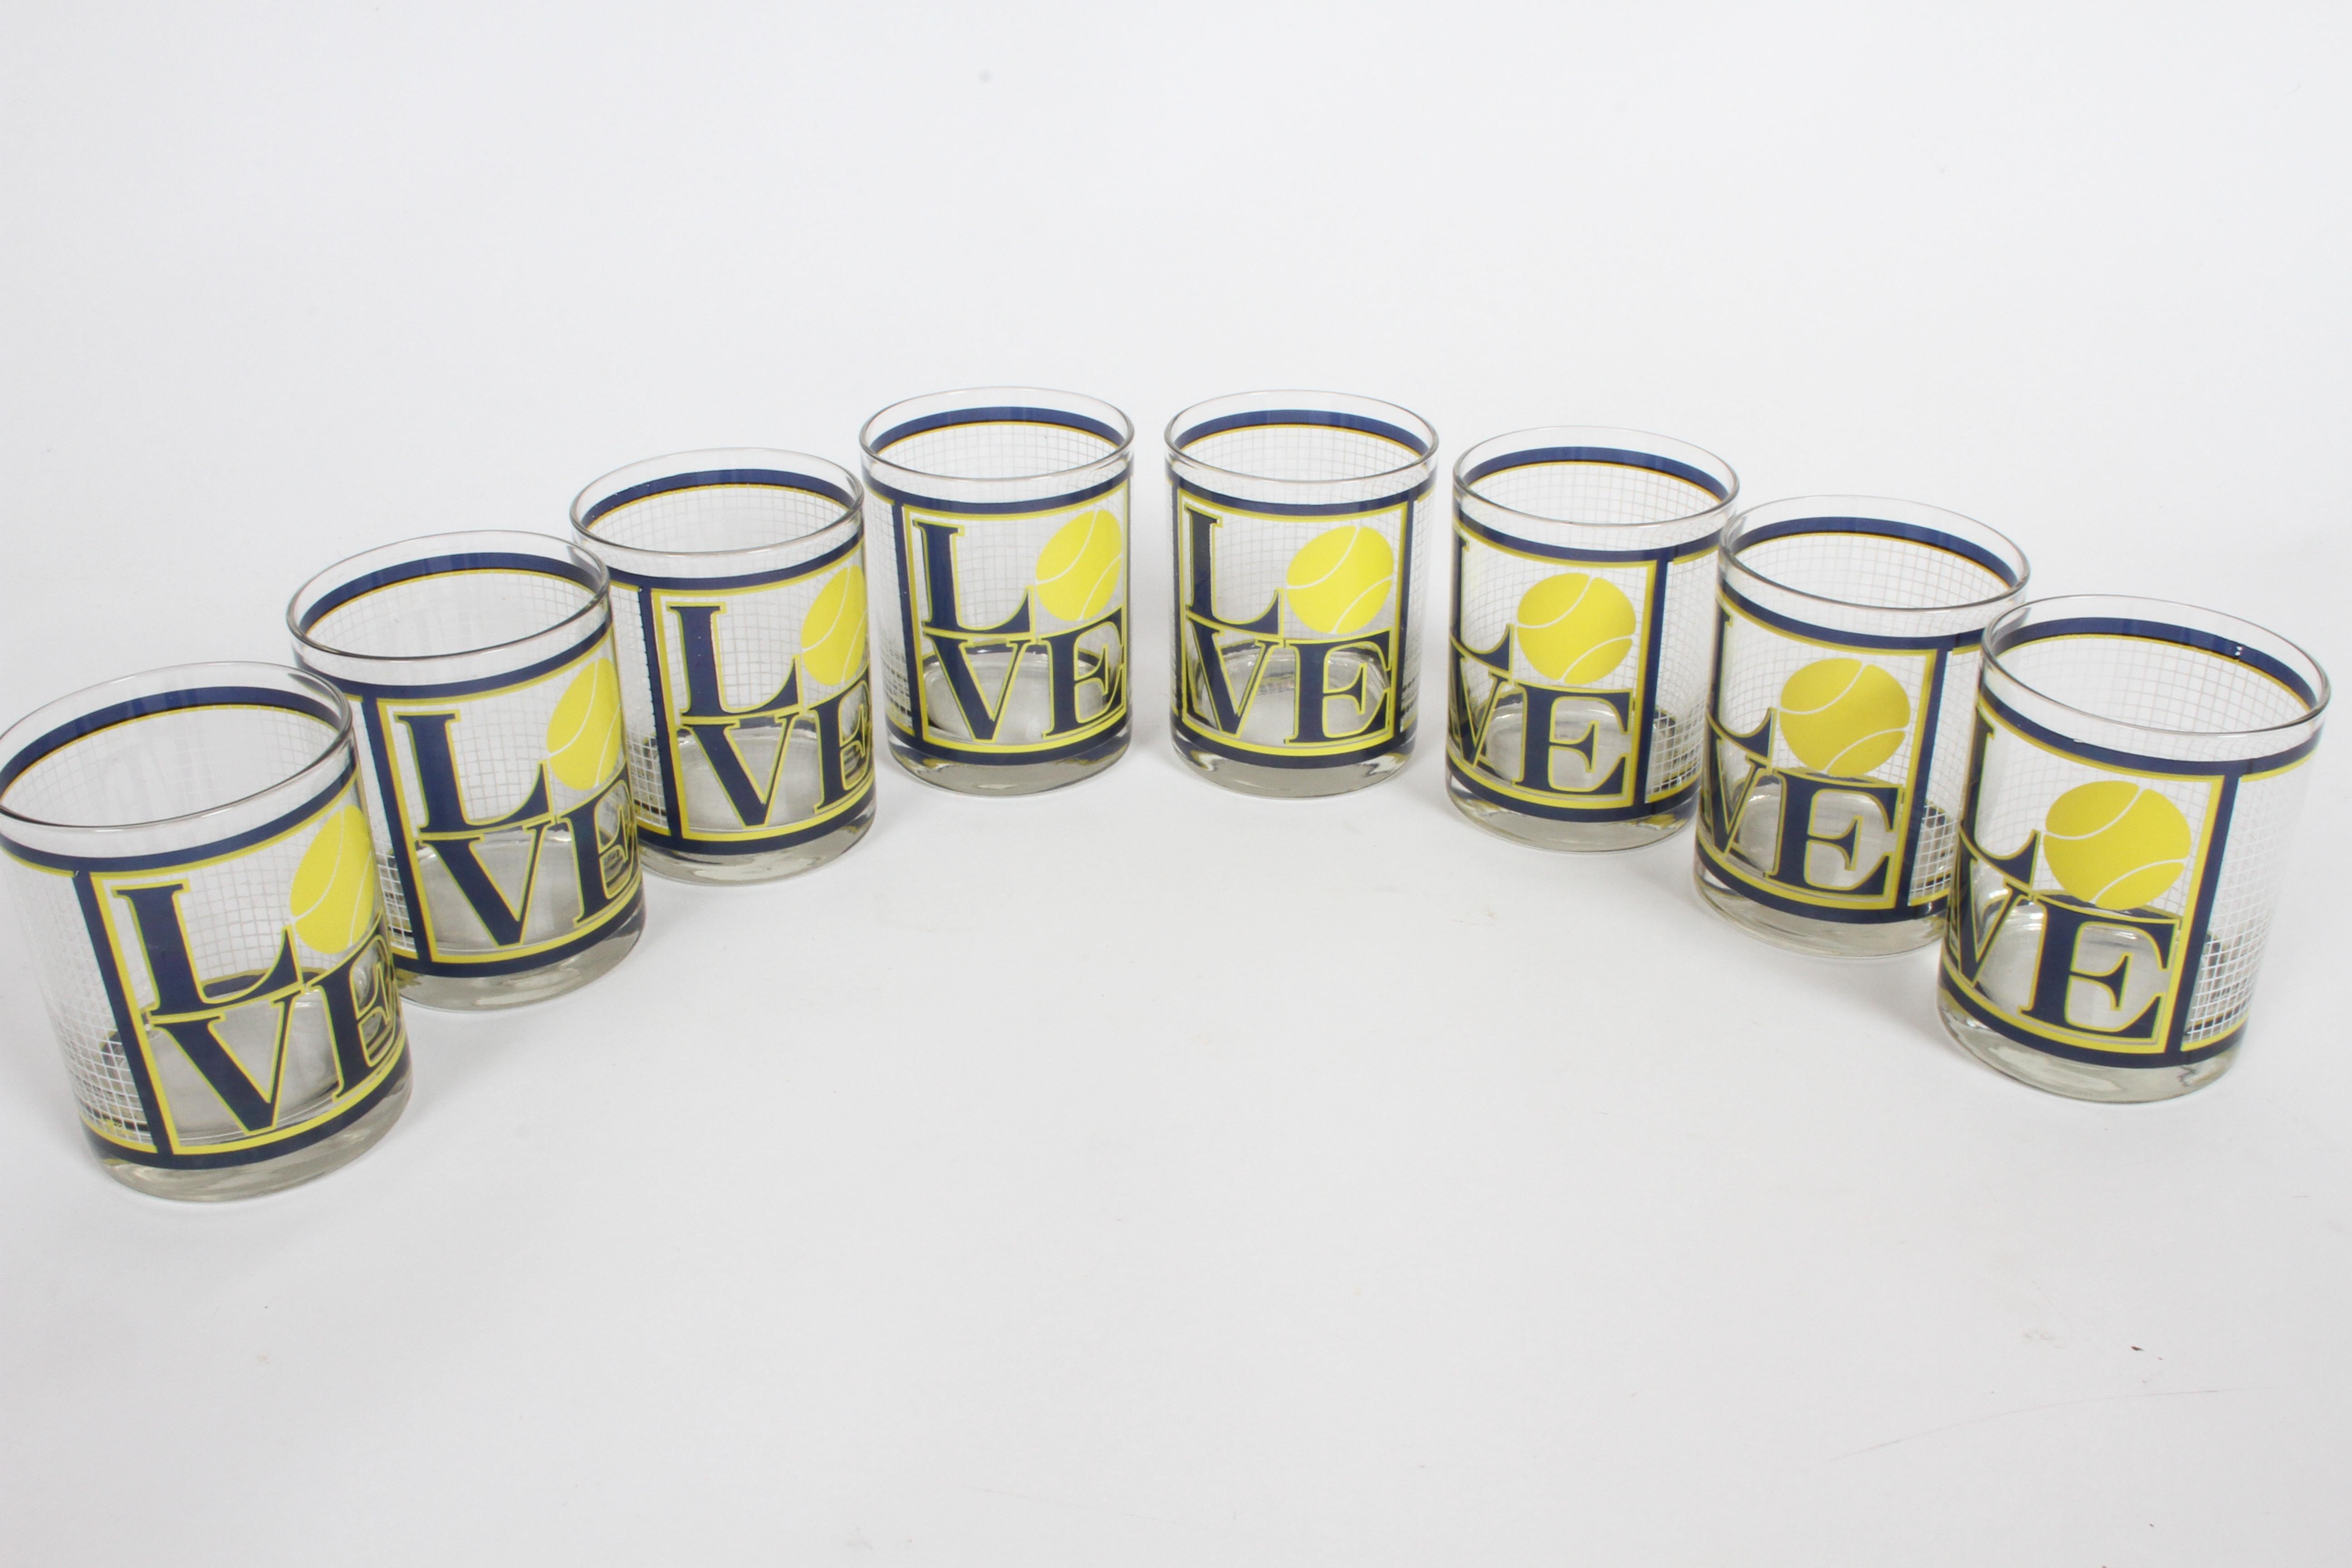 Set of 8 low ball glasses after Robert Indiana's Love design. Manufactured by Cera, glasses have tennis ball inserted in the iconic Love graphic, and grid as the net. Signed Cera. In nice gently used condition, no chips or major wear.